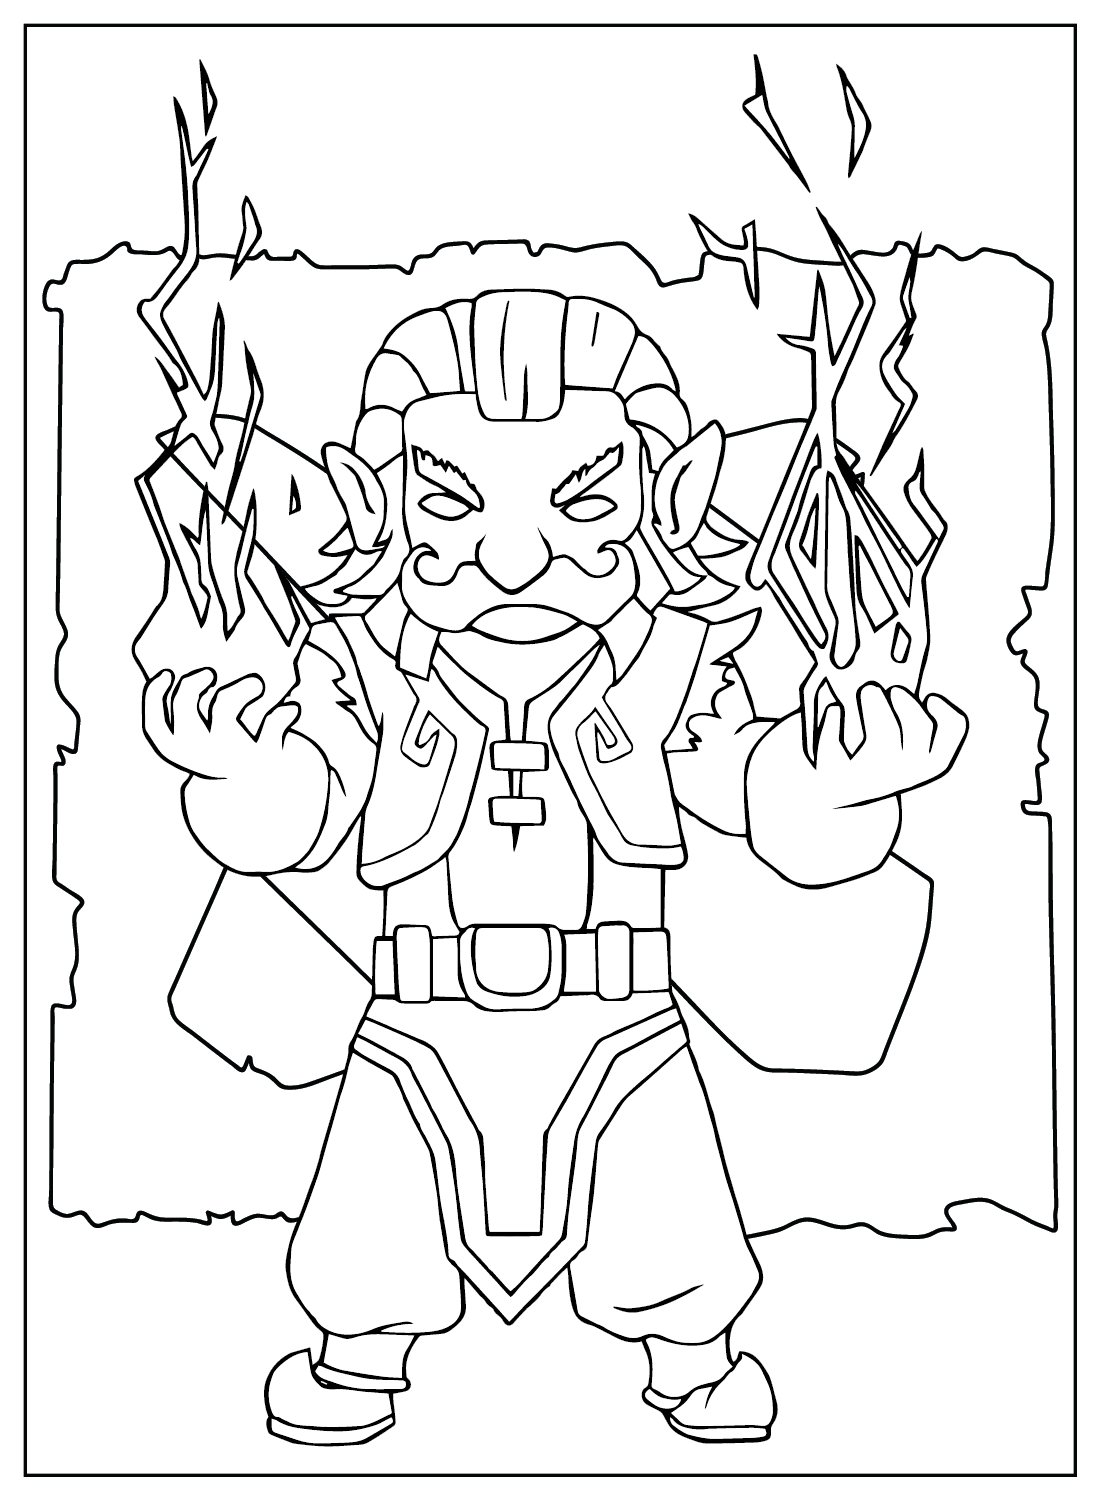 Zeus Coloring Page from Dota 2